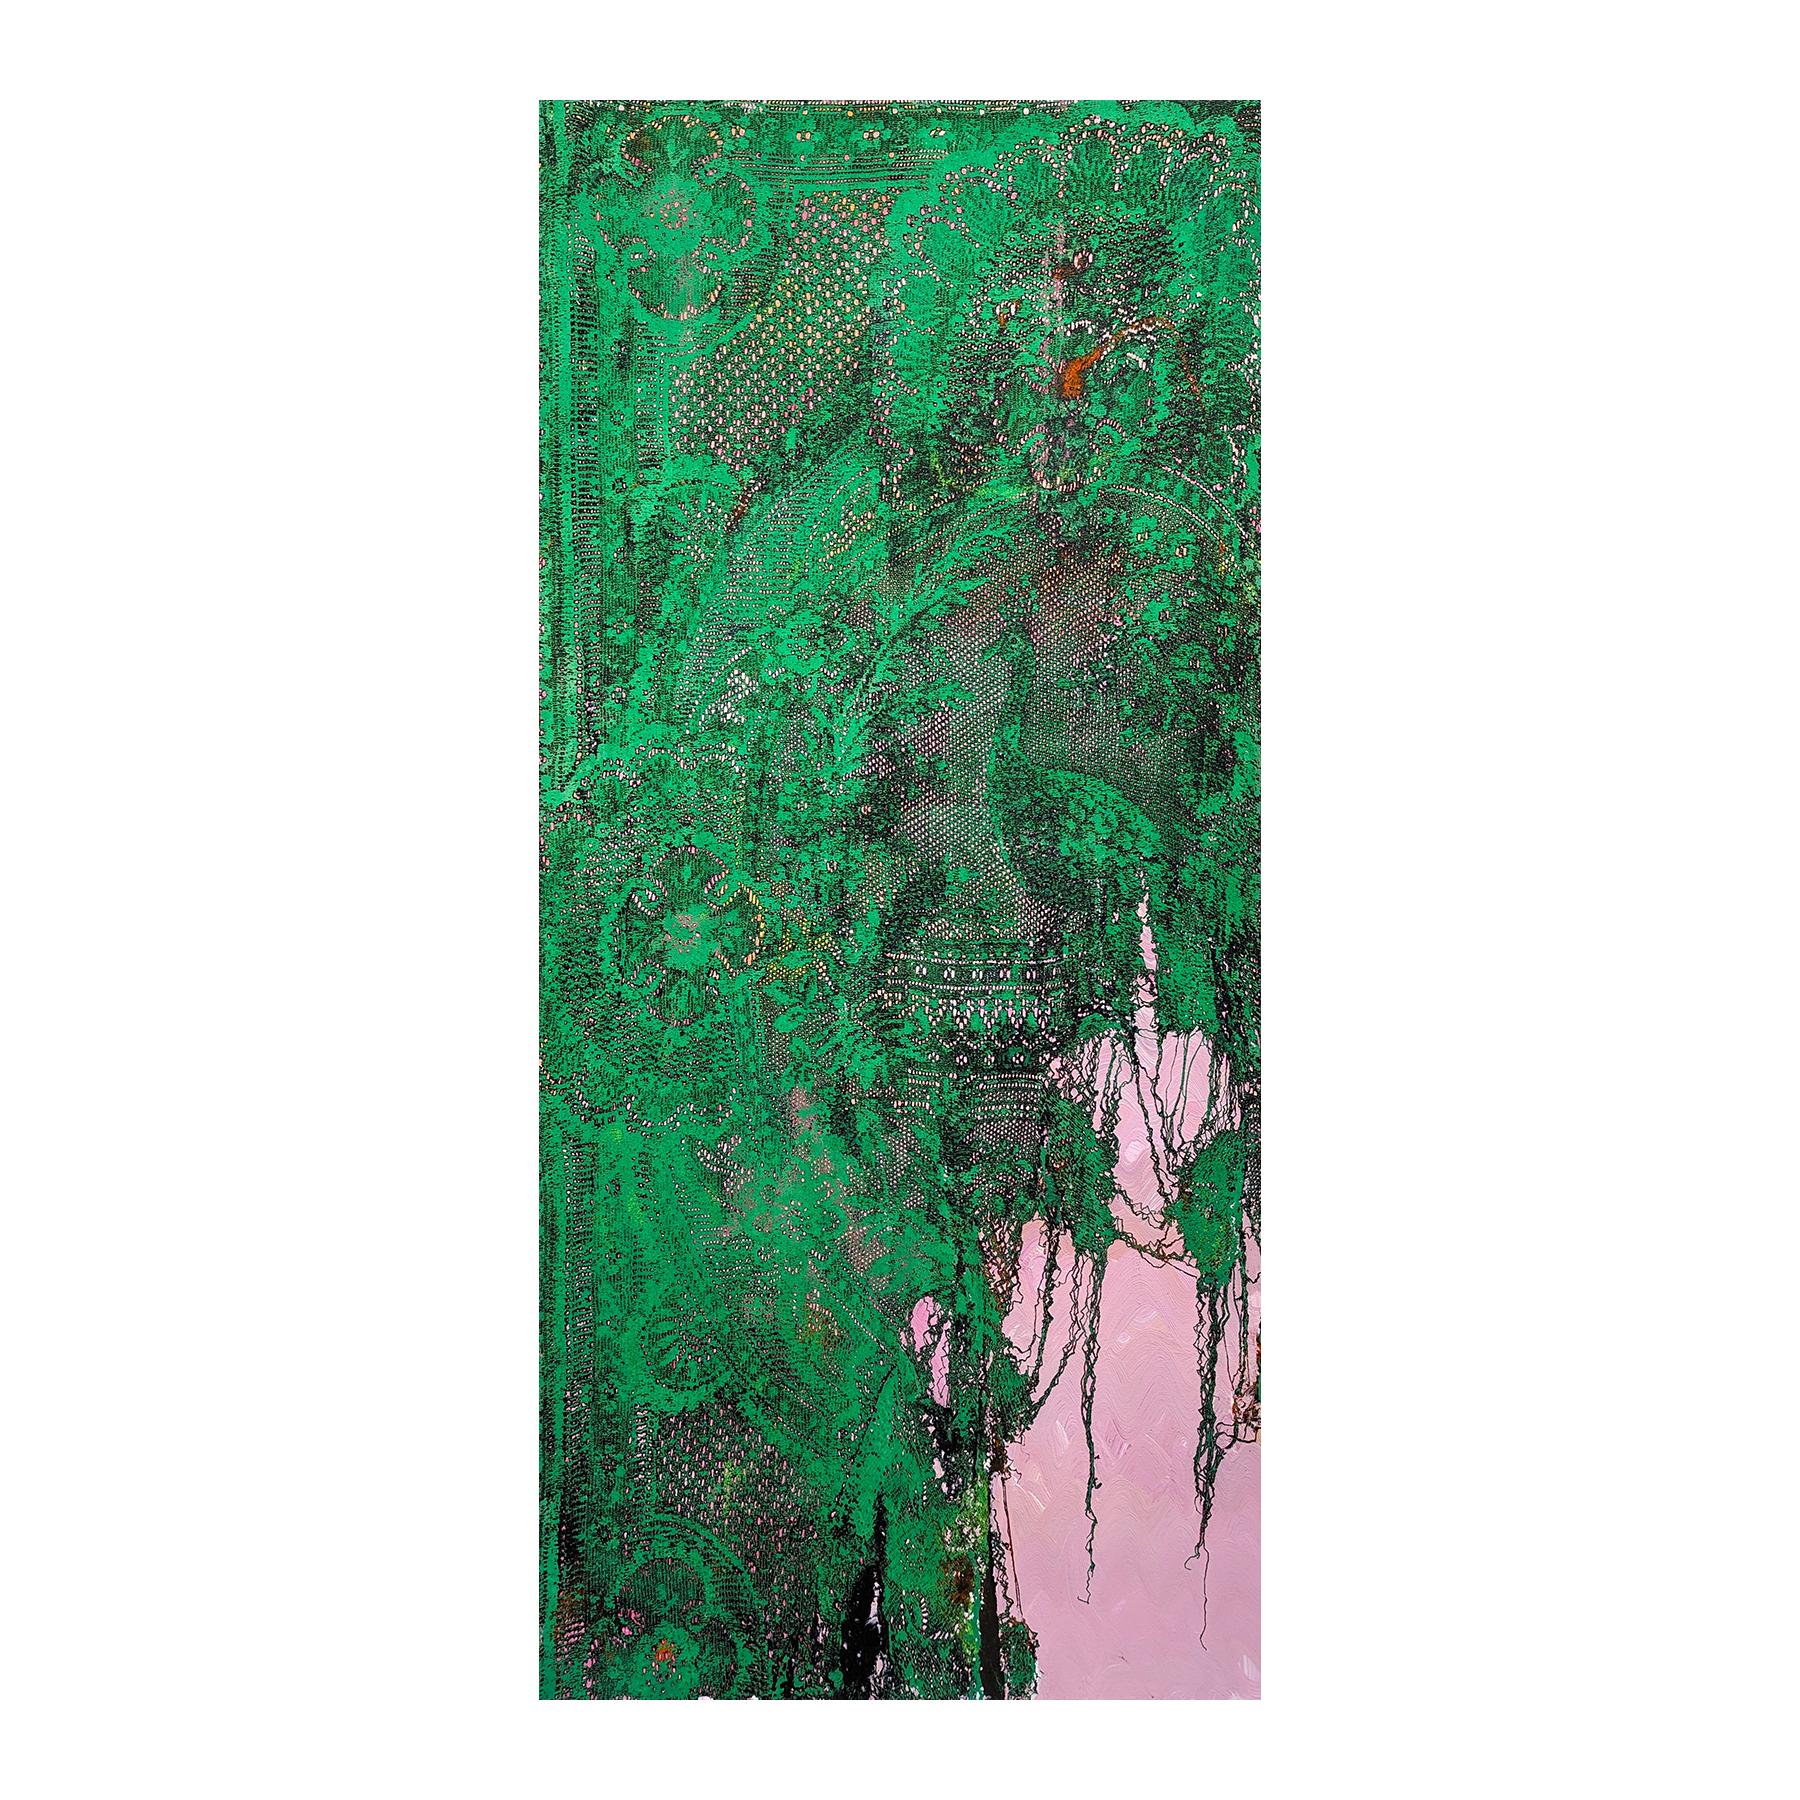 “Green Peacock” Contemporary Green & Pink Abstract Lace Painting - Blue Abstract Painting by Mark Flood